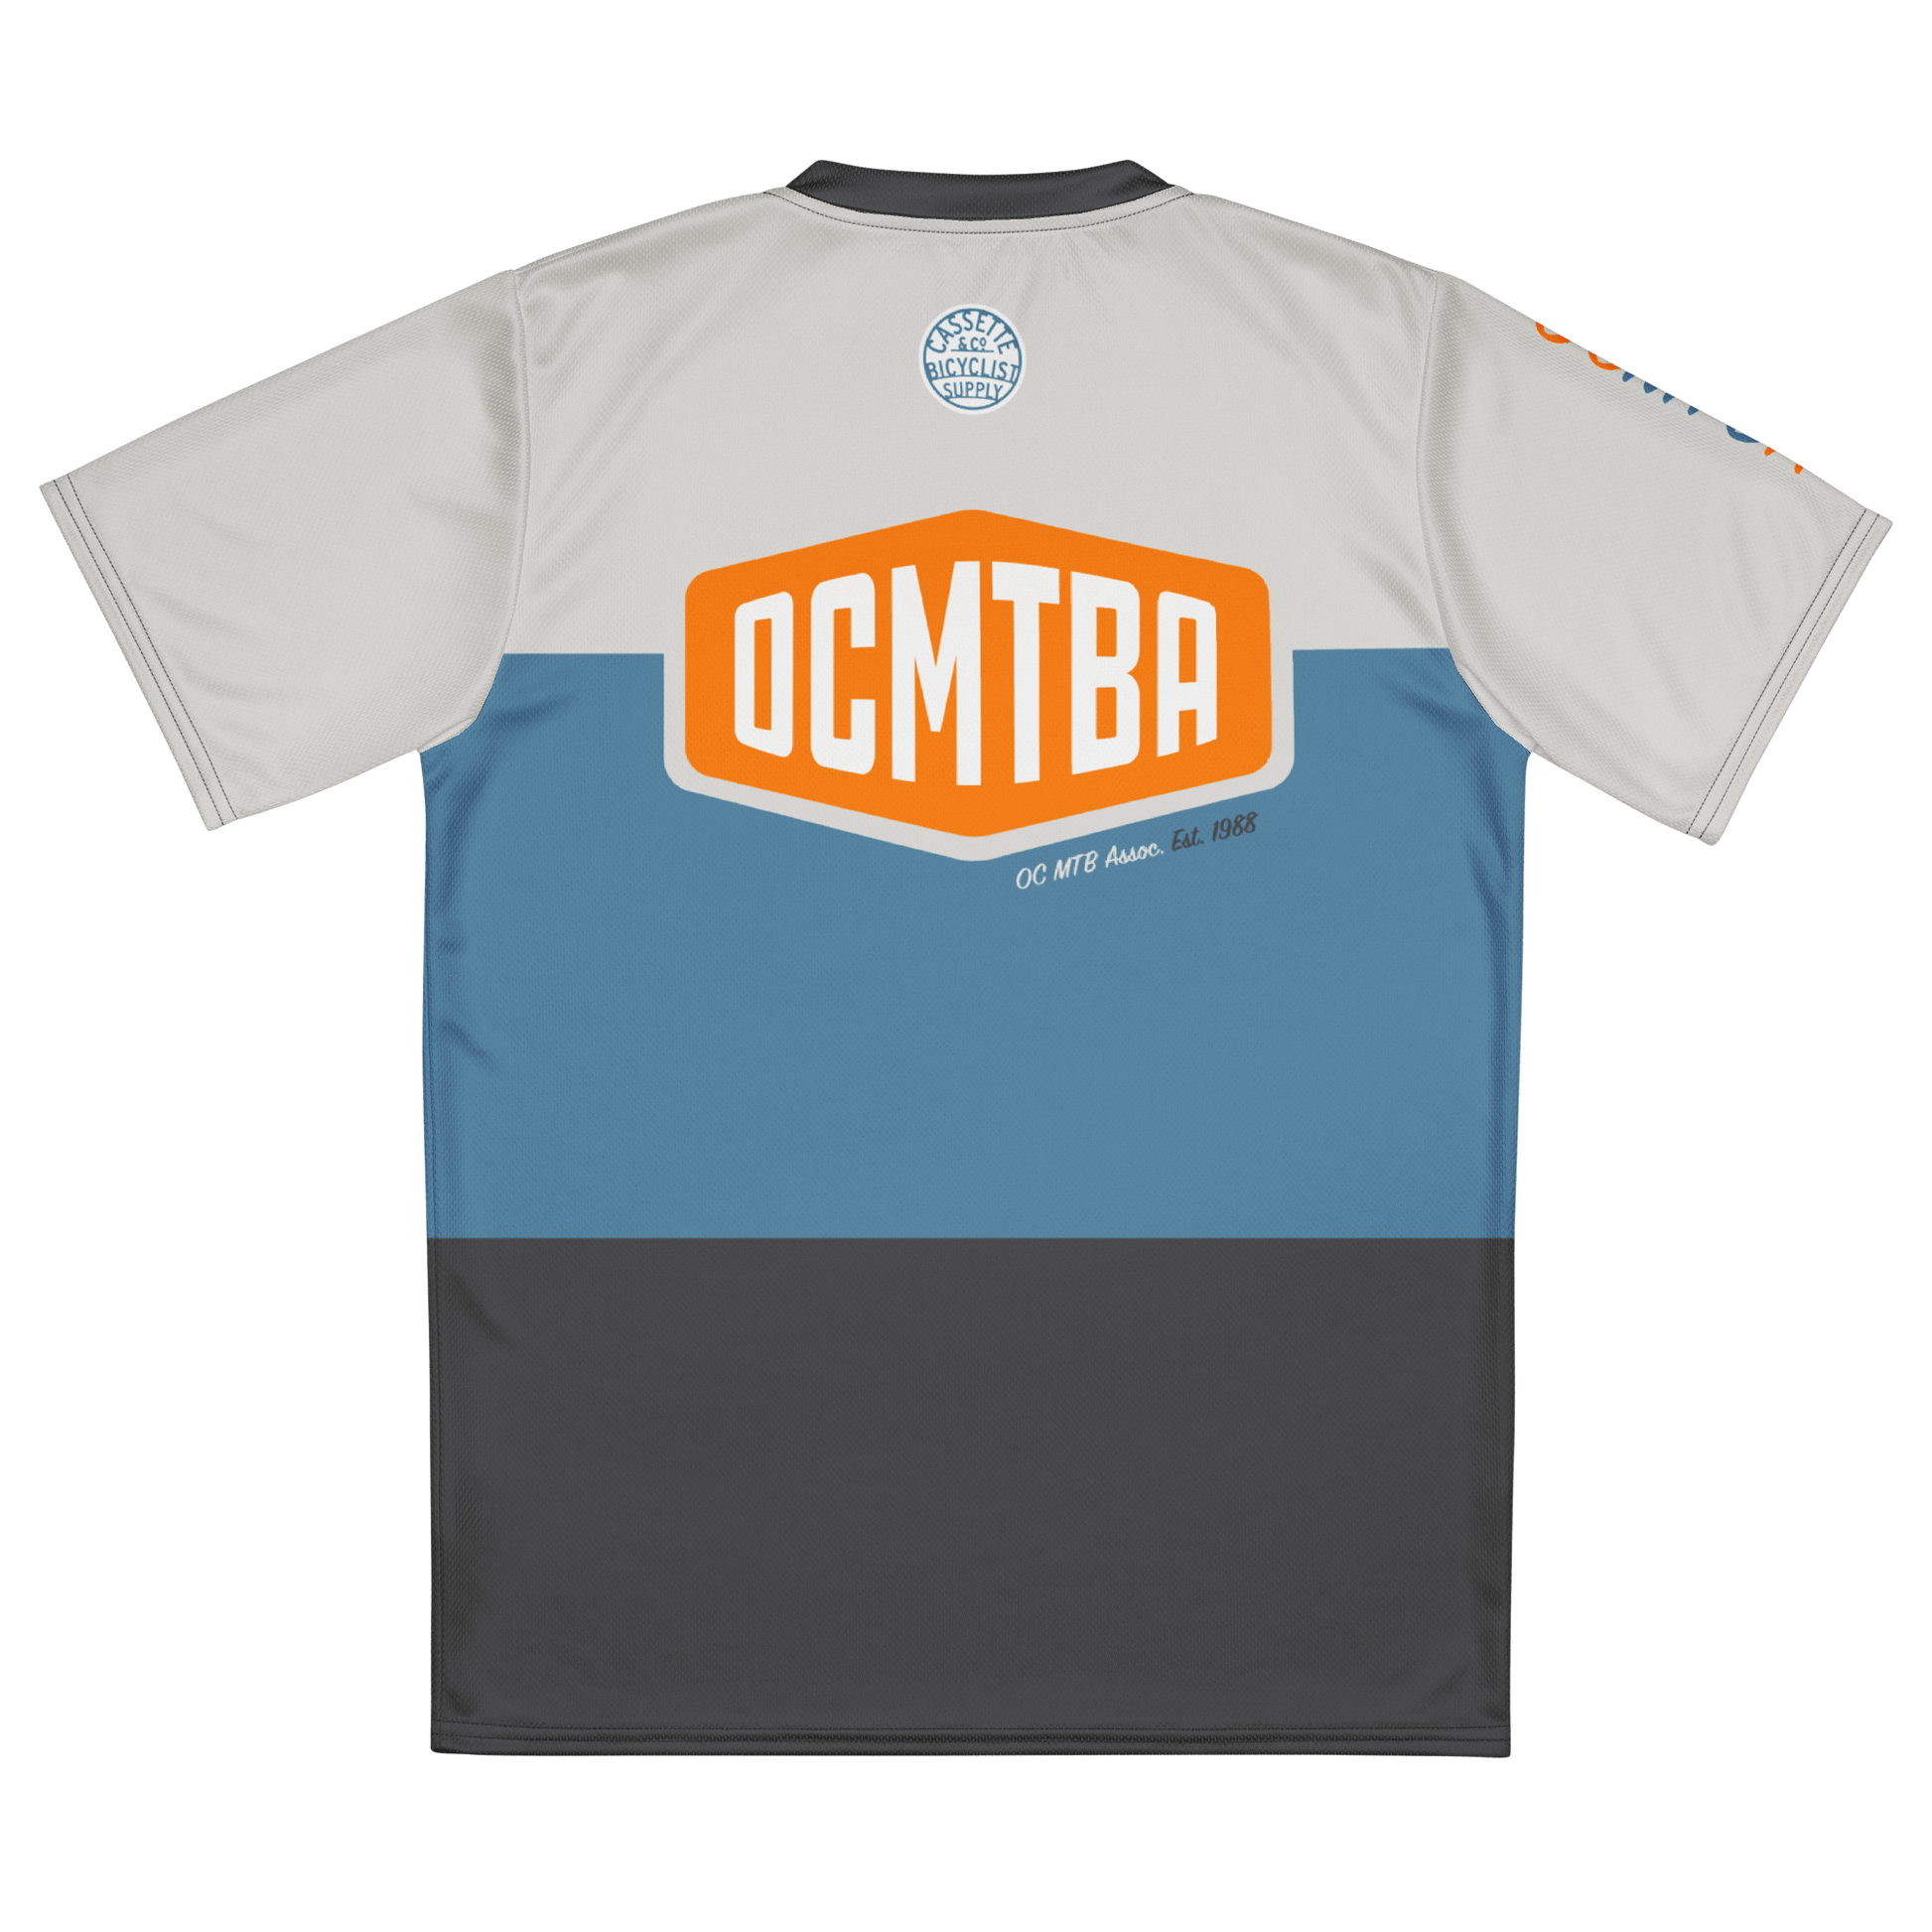 ocmtba trail jersey with dark gray, light blue and natural color stripes